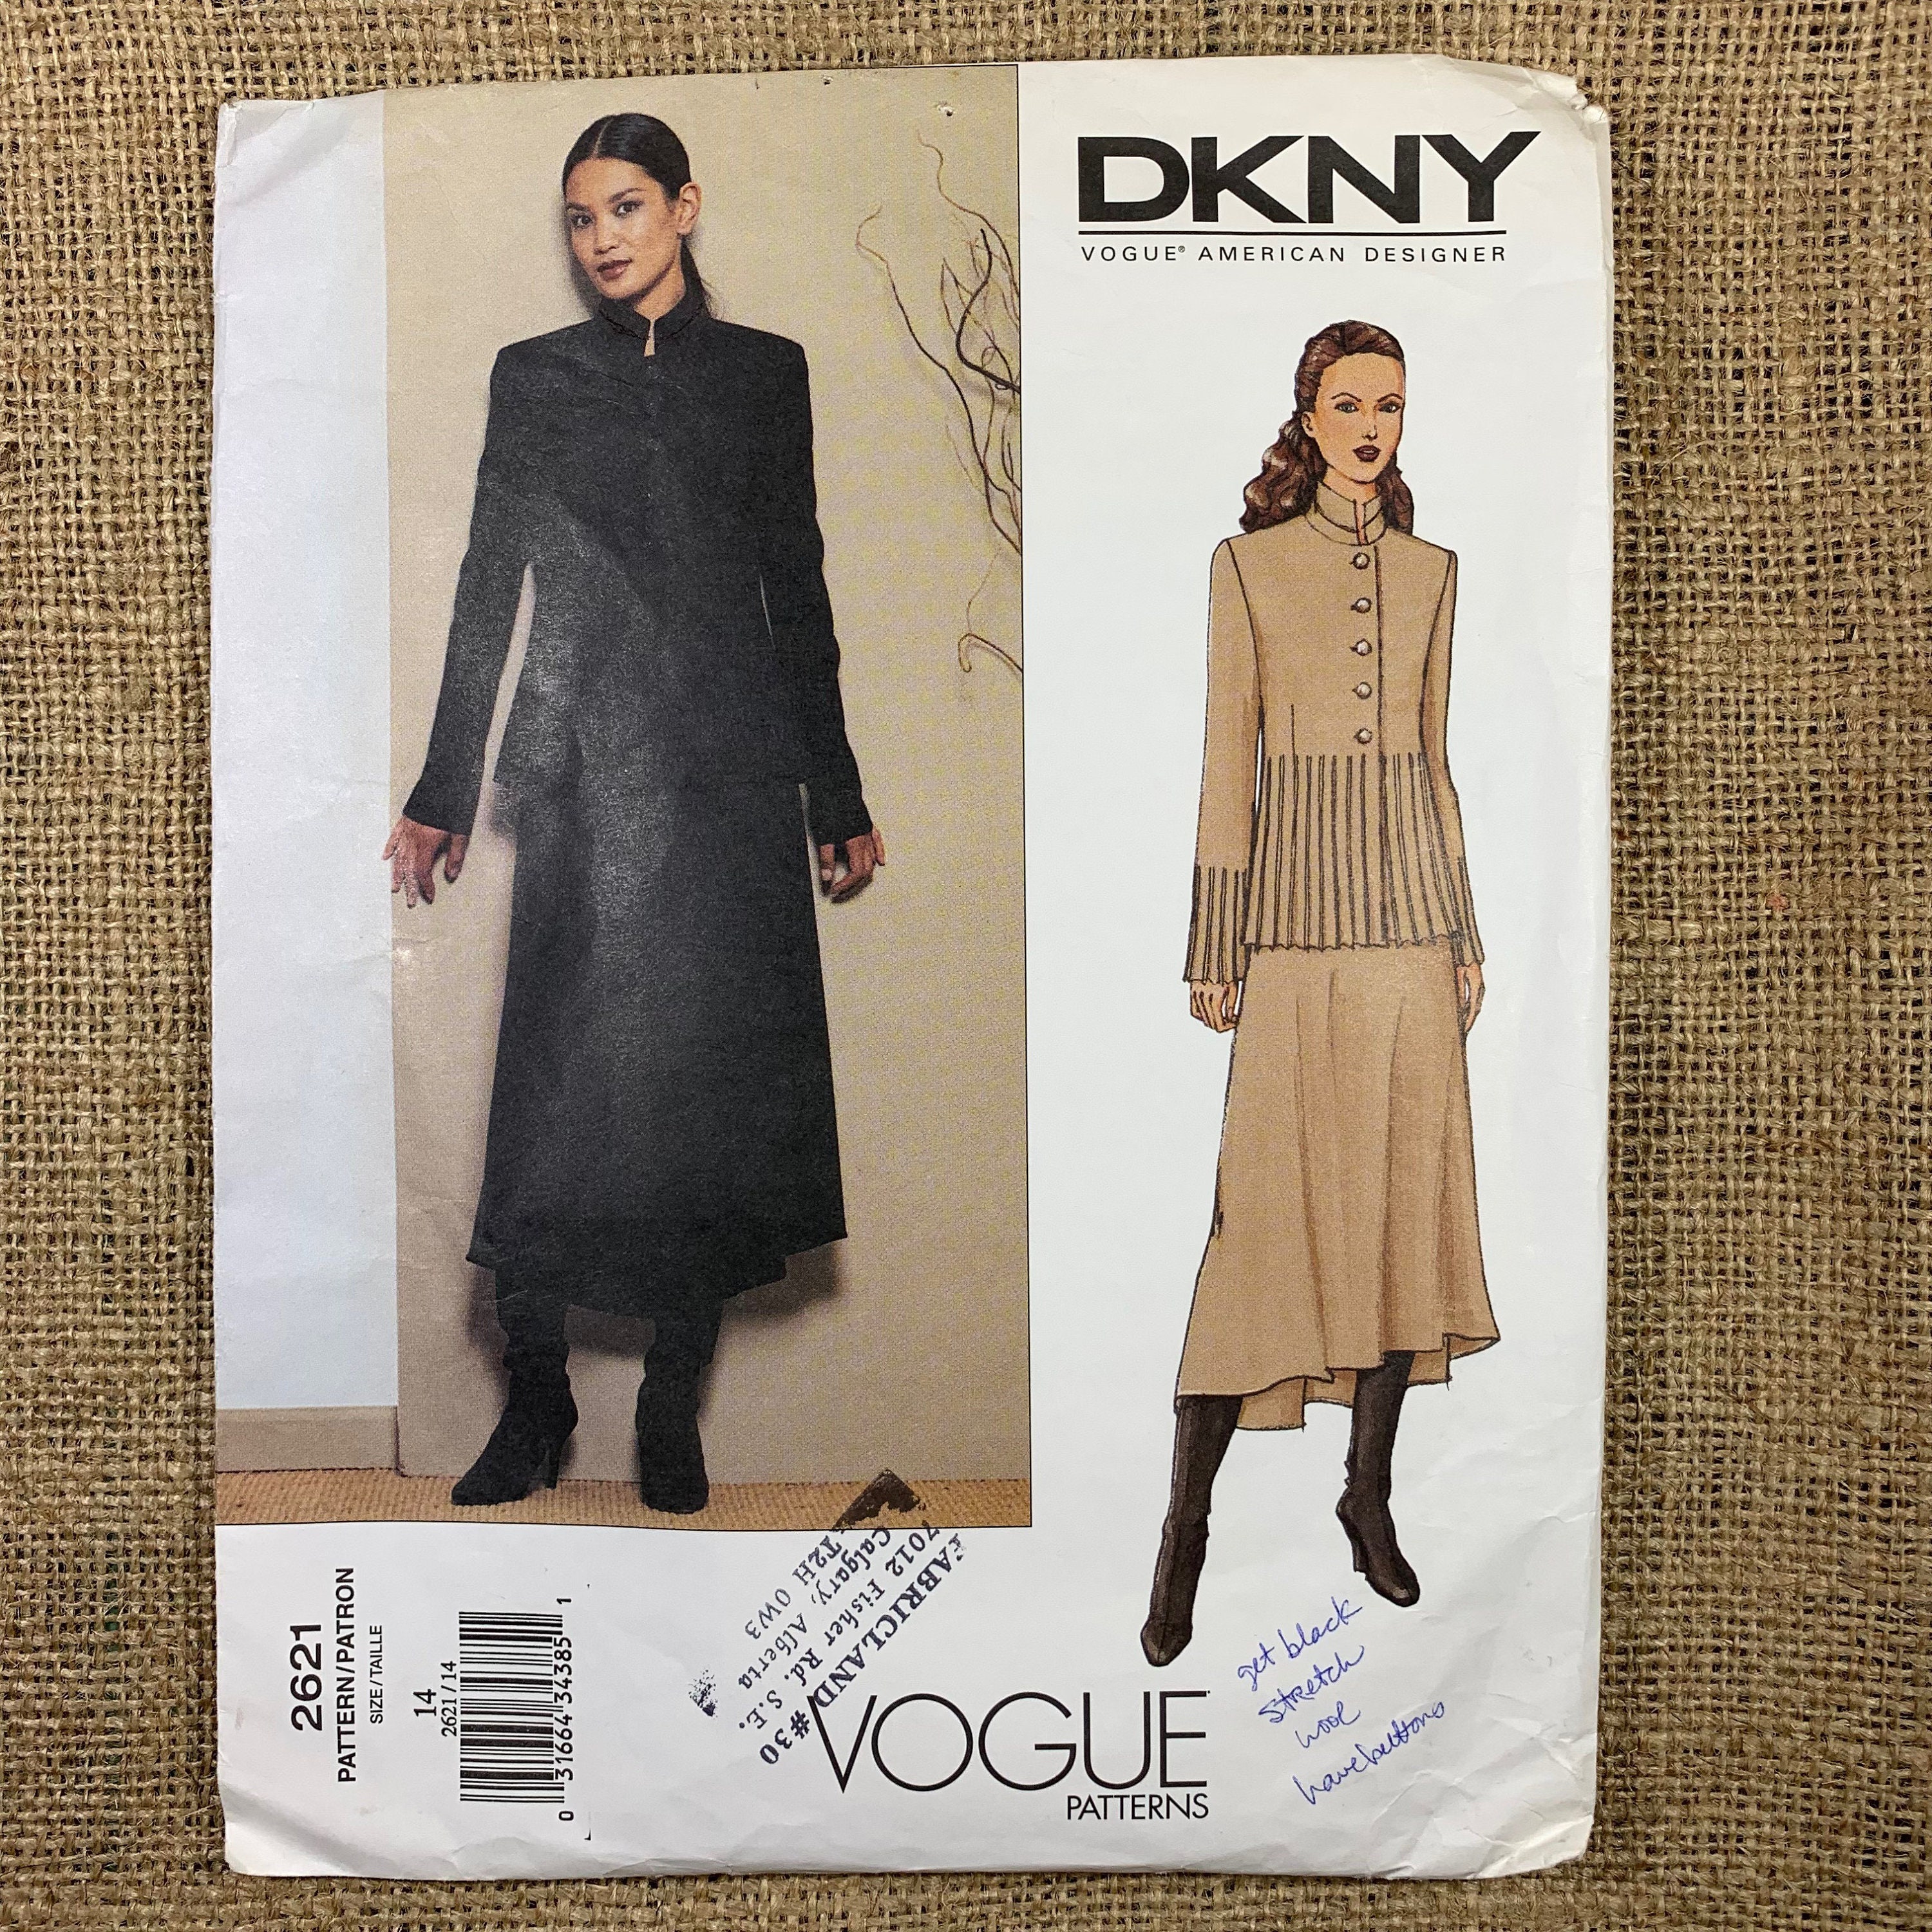 VOGUE DKNY VINTAGE 1990s Gilet Gonna Camicetta Camicia Sewing Pattern Taglia 8-12 